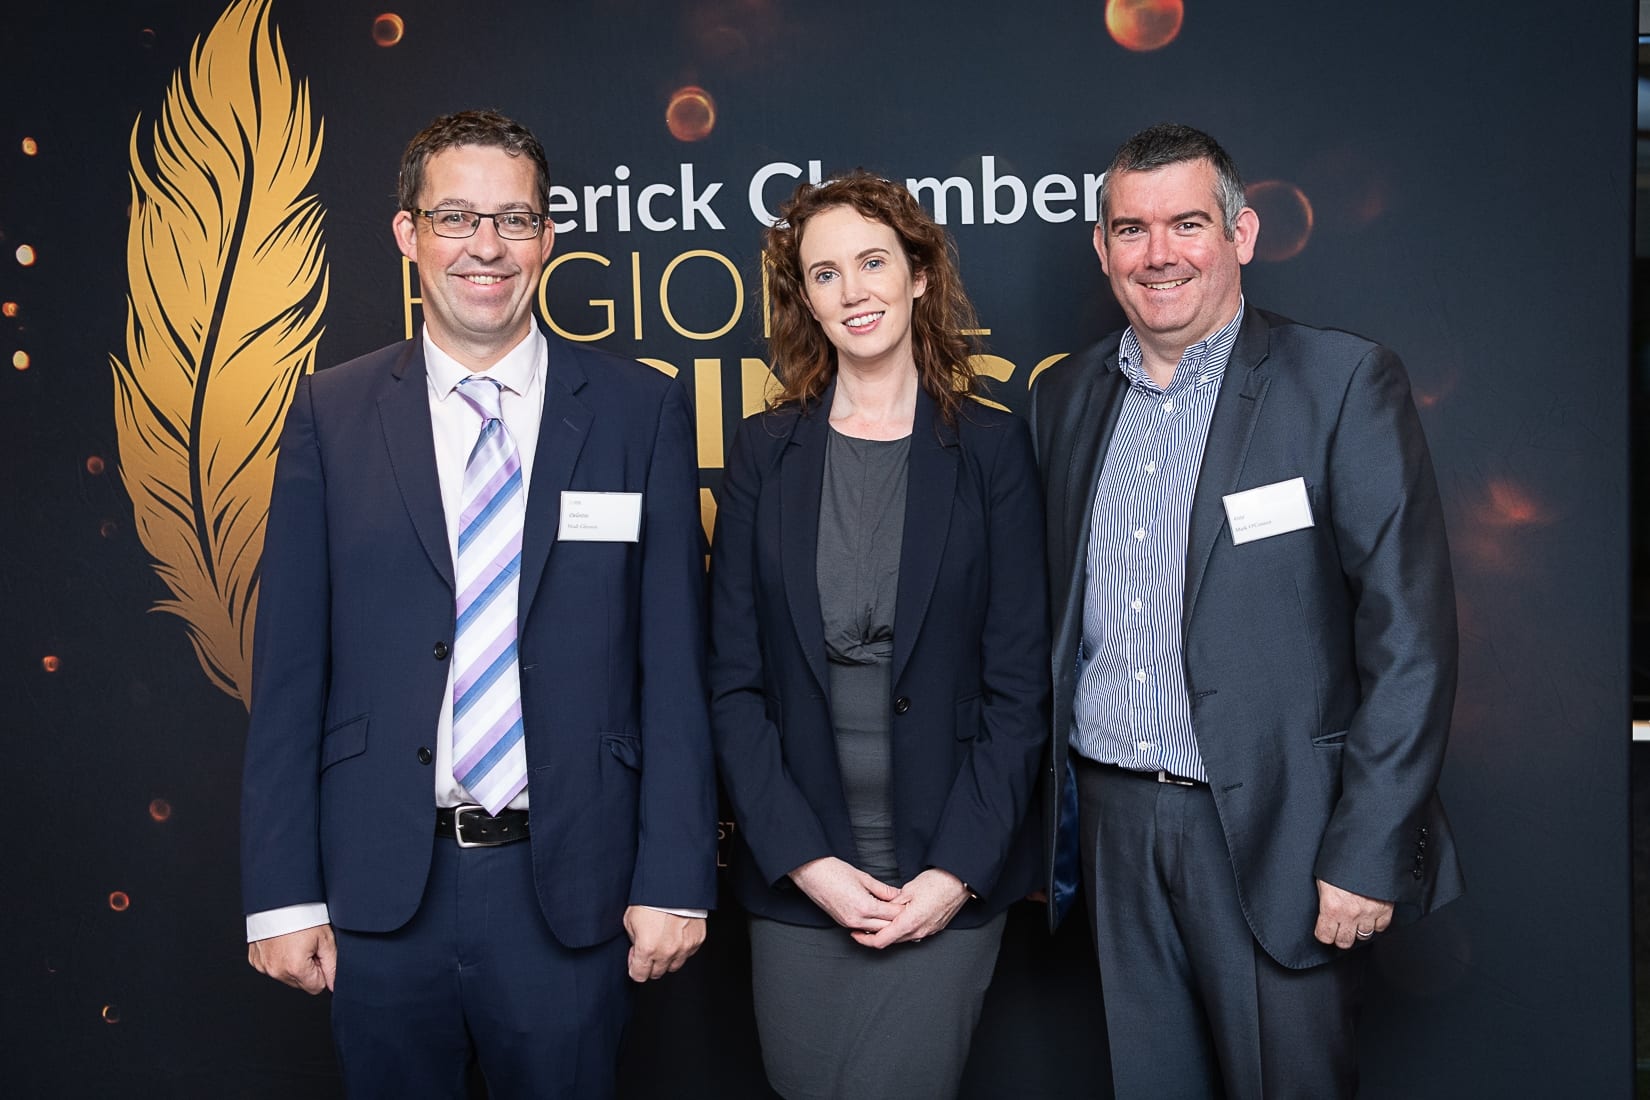 No repro fee-Limerick Chamber President Dinner Shortlist announcement which was held in The Limerick Strand Hotel on Wednesday 16th October  - From Left to Right: Niall Glesson - Deloitte, Mary McNamee- Limerick Chamber, MarkO’Connor - 4 Site. 
Photo credit Shauna Kennedy